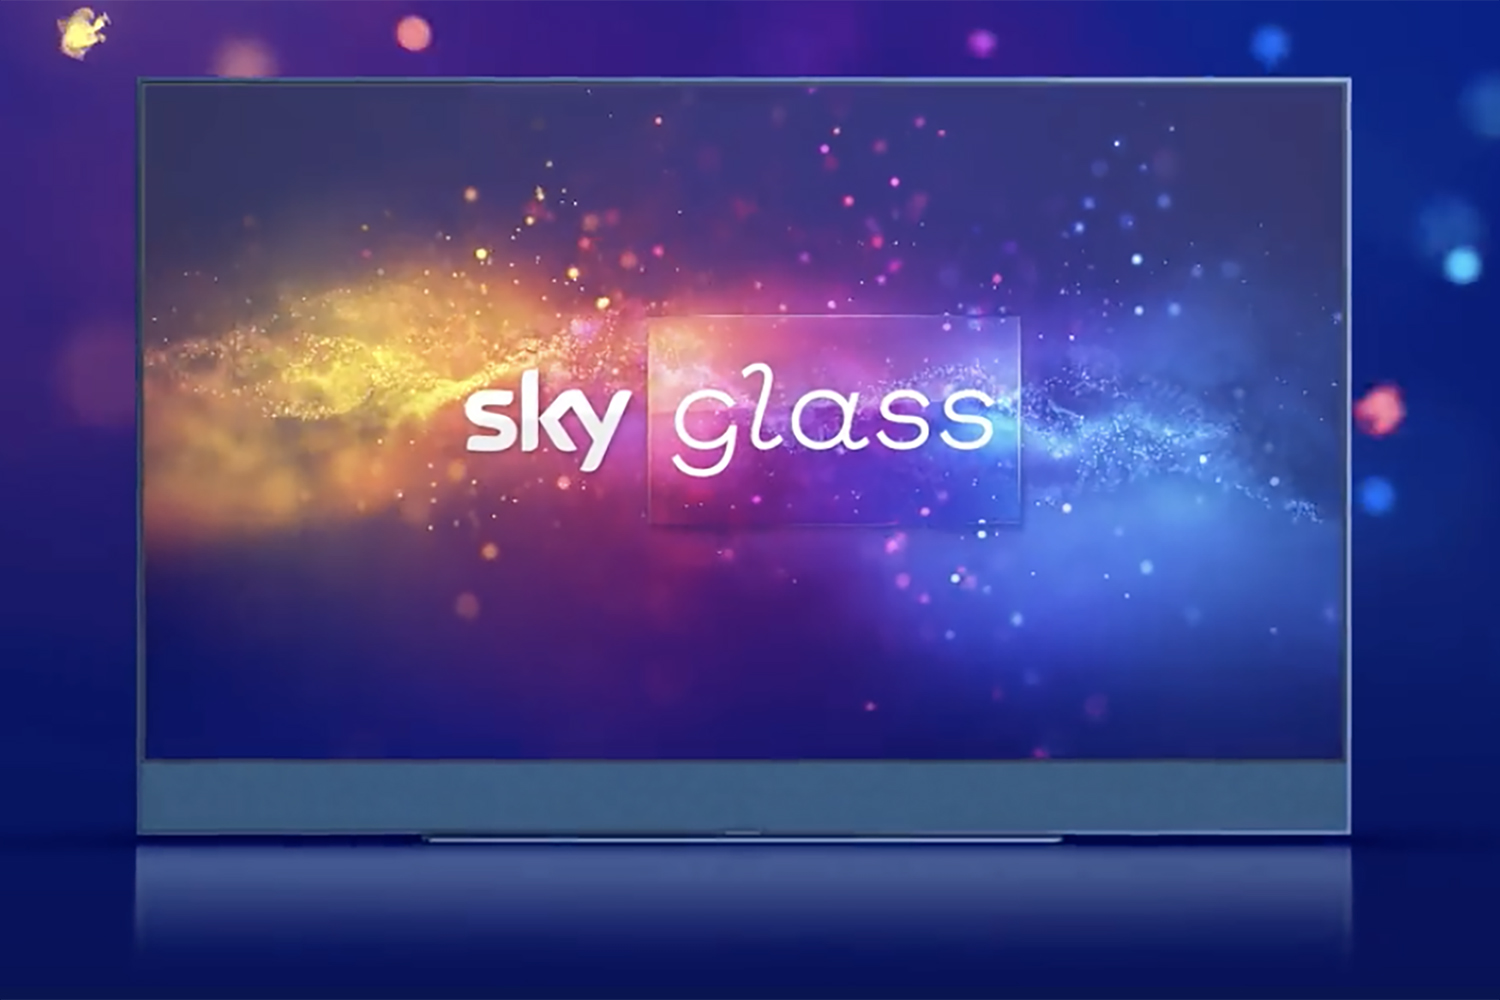 Sky Glass is now available to pre-order